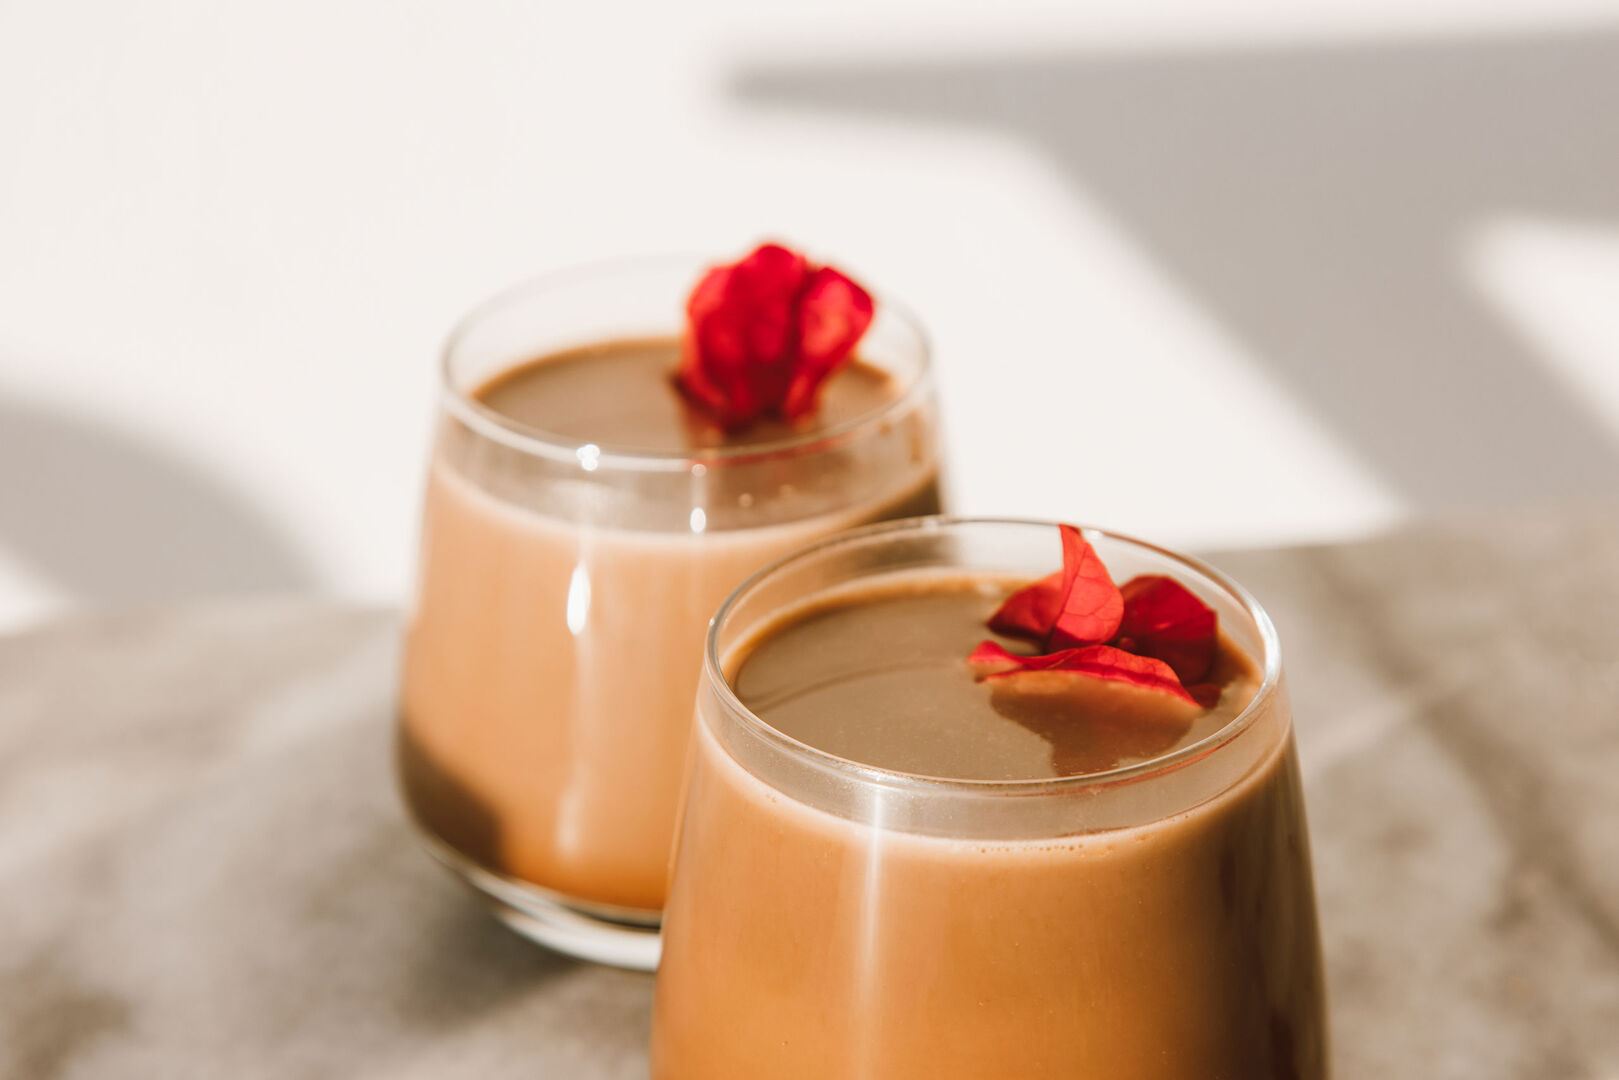 https://s.libertaddigital.com/2021/11/24/1920/1080/fit/two-clear-drinking-glasses-with-brown-liquid-topped-with-red-petals.jpeg